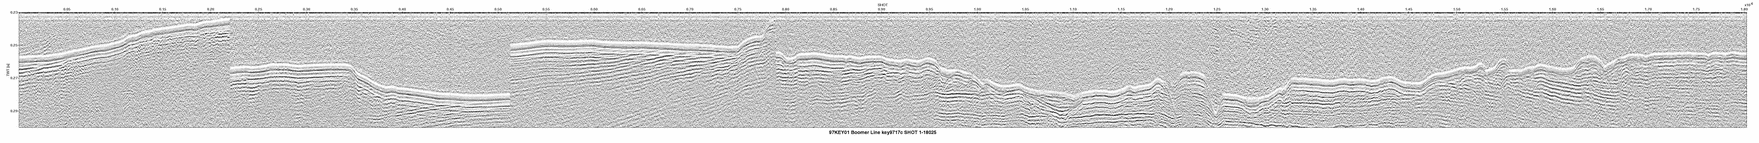 Thumbnail GIF image of the seismic trackline key9717c, with a hotlink to the more detailed, larger JPG image.